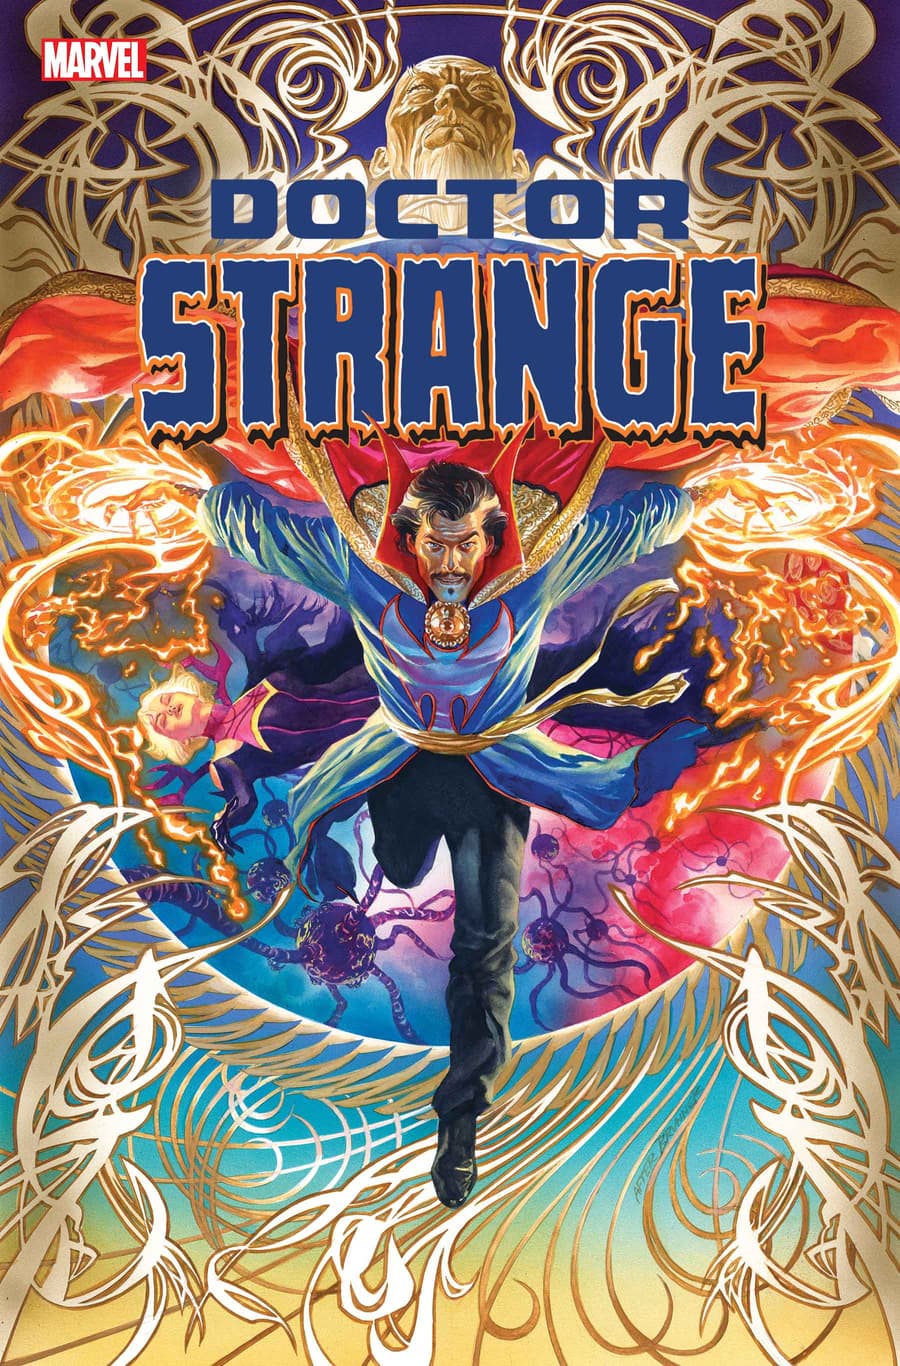 DOCTOR STRANGE #1 main cover by Alex Ross